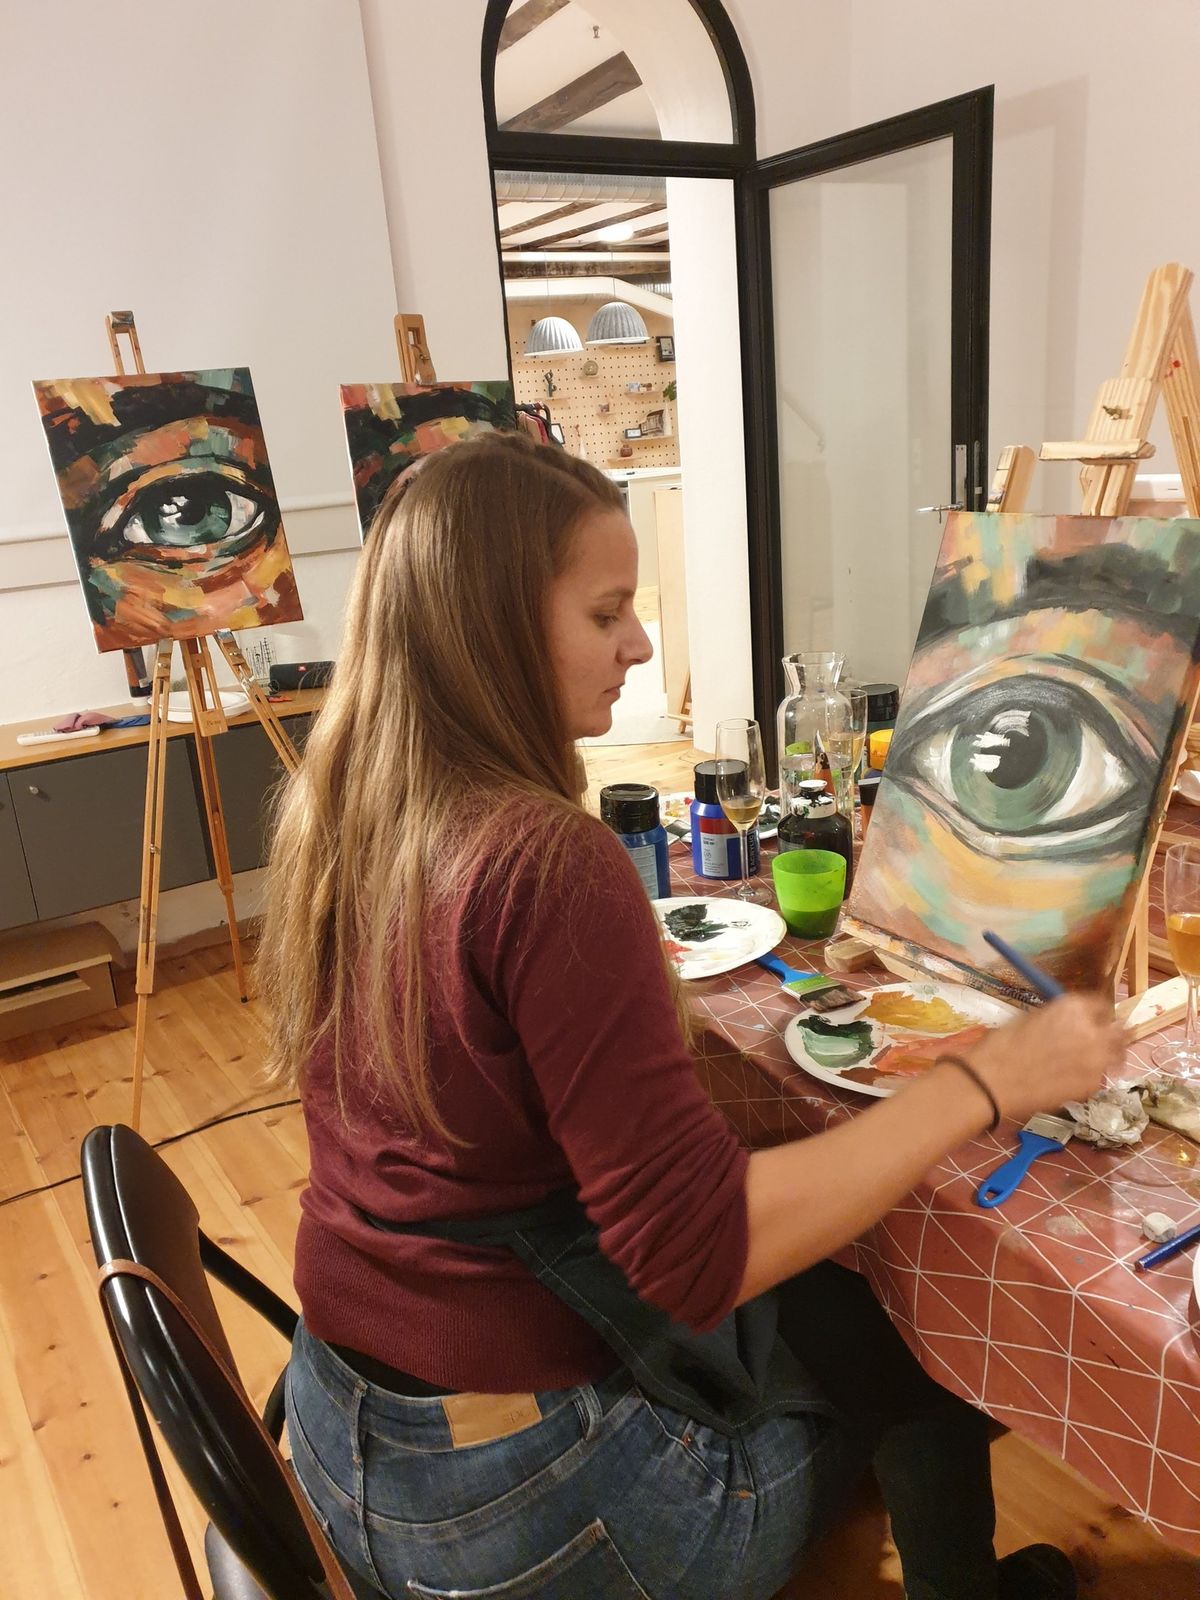 SIP AND CREATE: PAINT AN ABSTRACT EYE PAINTING